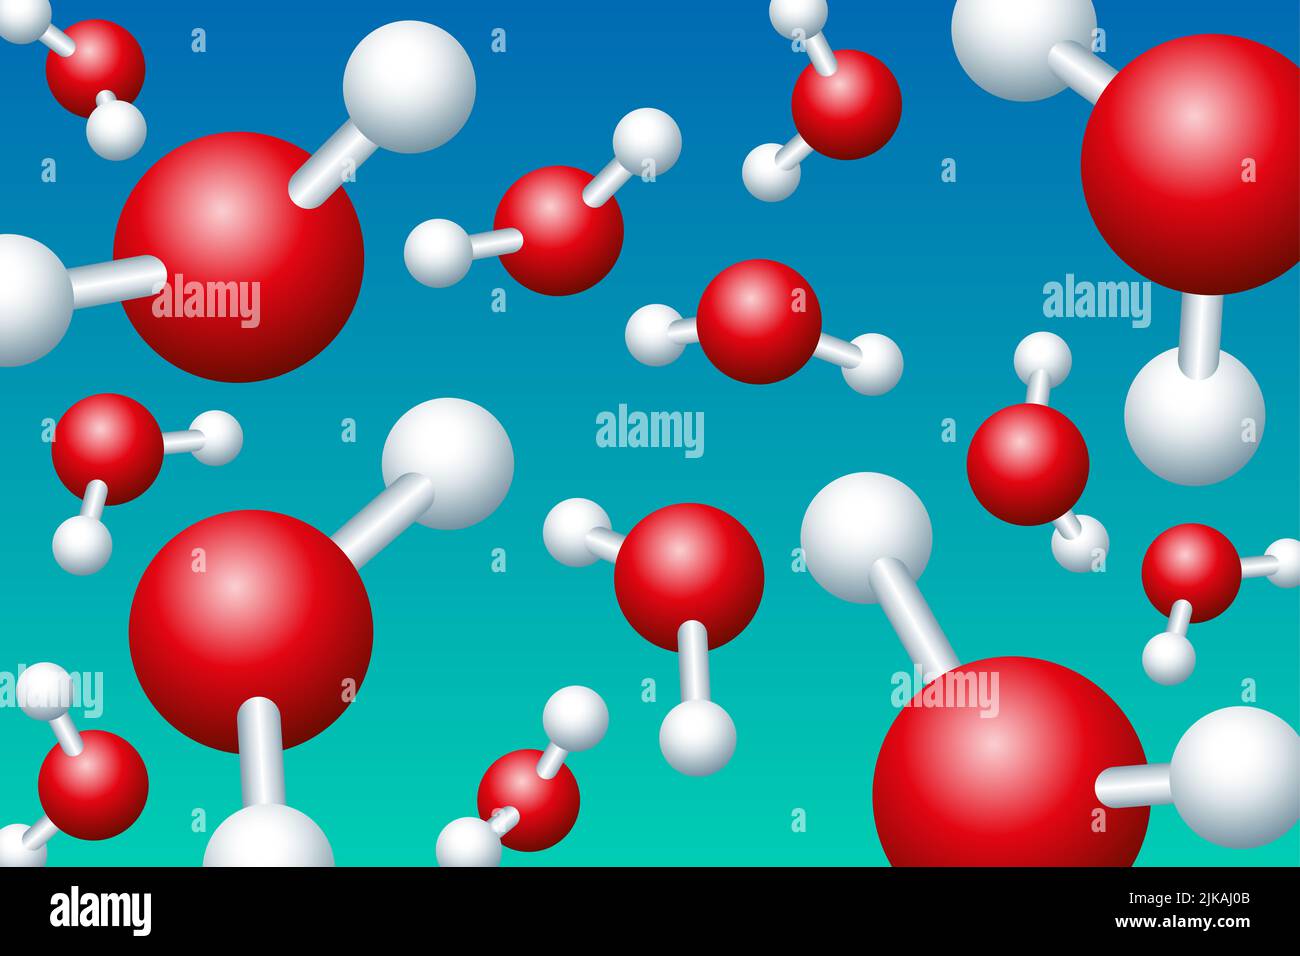 Water molecules floating around in front of a bluish turquoise background. Ball-and-stick models of H2O molecules. Stock Photo